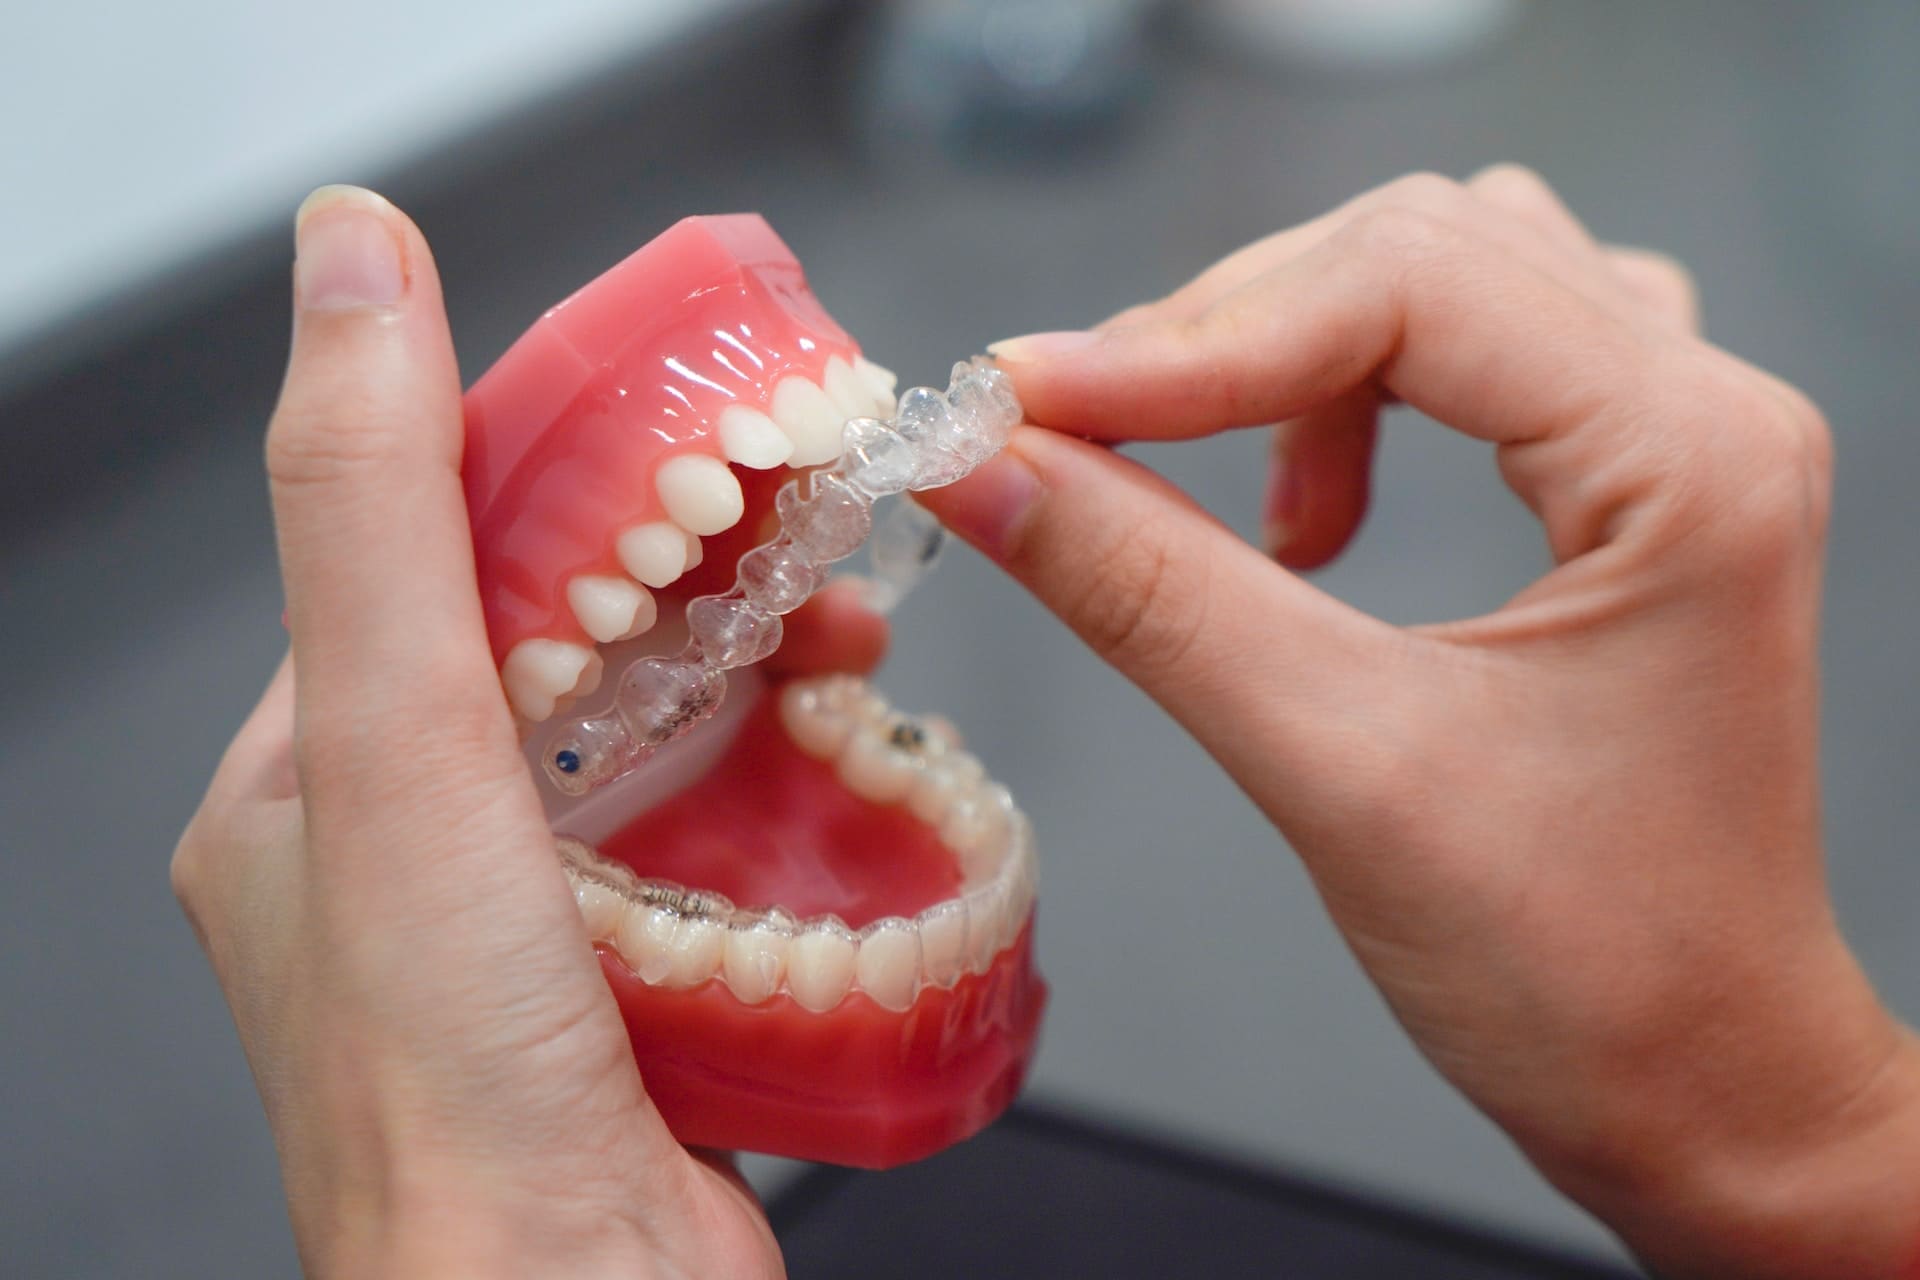 Invisalign aligners being placed on a set of fake teeth.